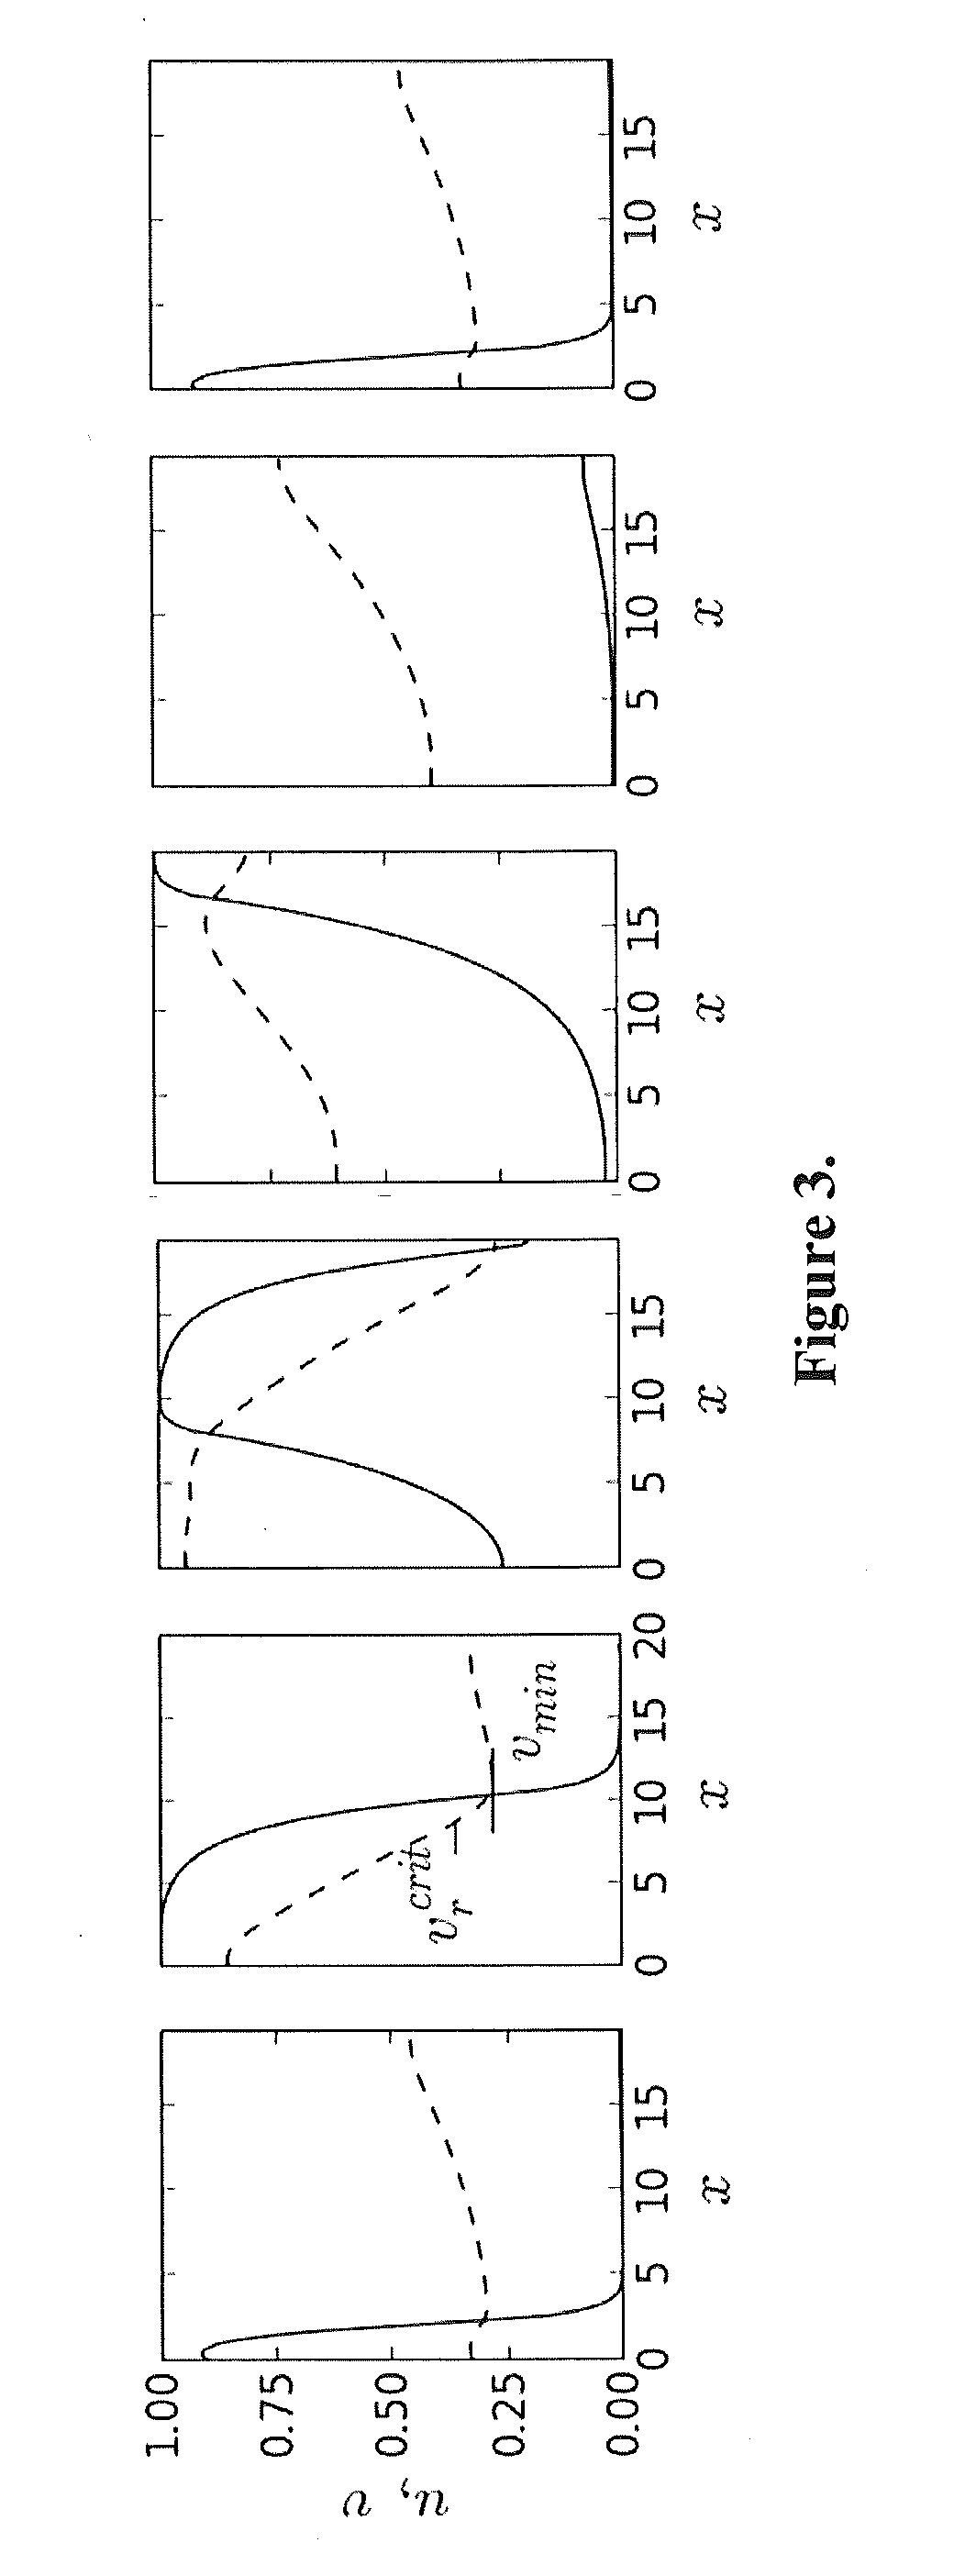 Method and system for evaluating stability of cardiac propagation reserve